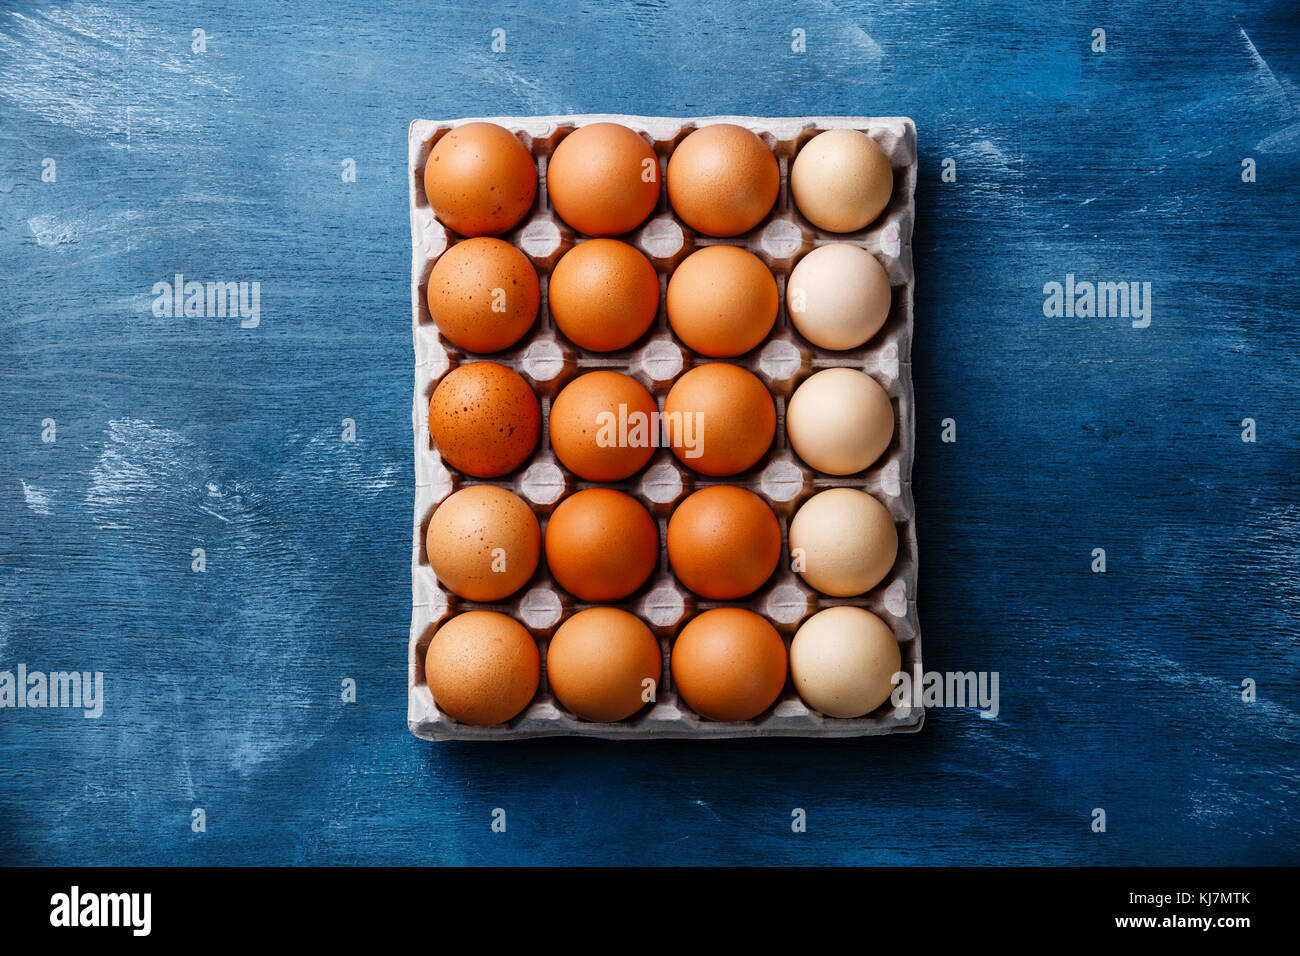 Fresh brown and speckled chicken Eggs in eco cardboard paper tray container on blue wooden background Stock Photo